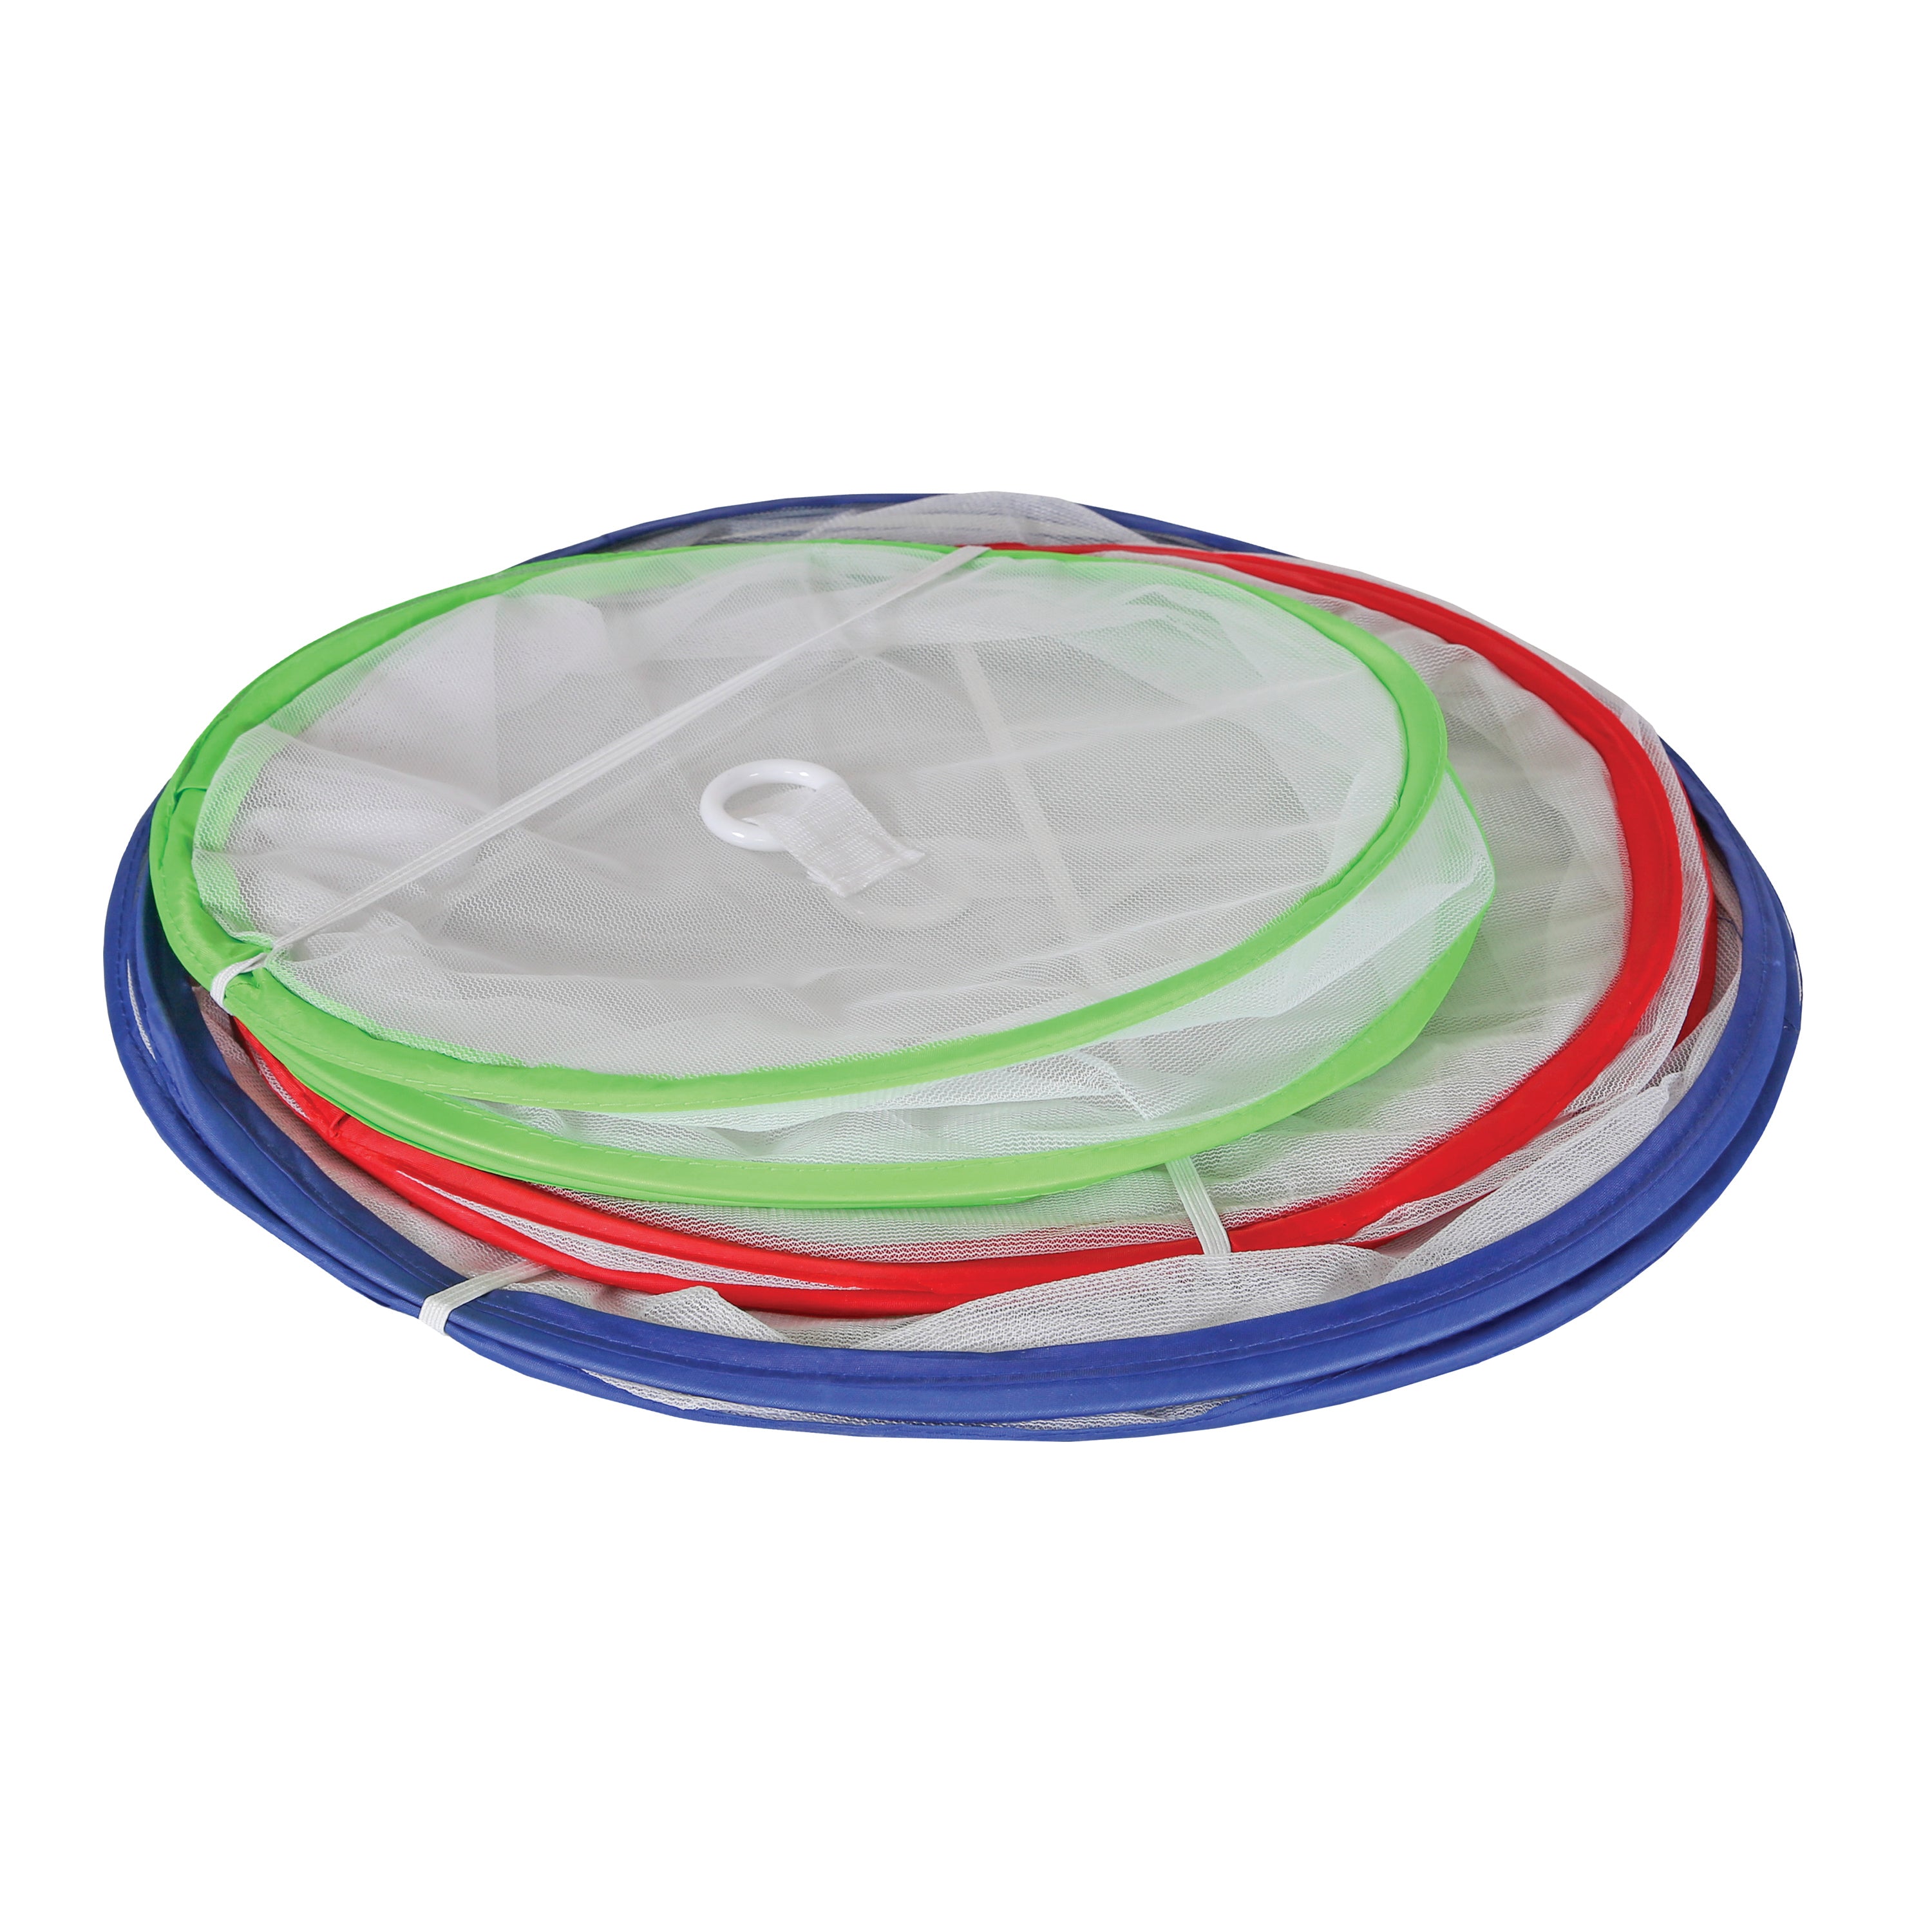 Food Covers - Set Of 3 - 15, 13.75 And 12 In Diameter-eSafety Supplies, Inc